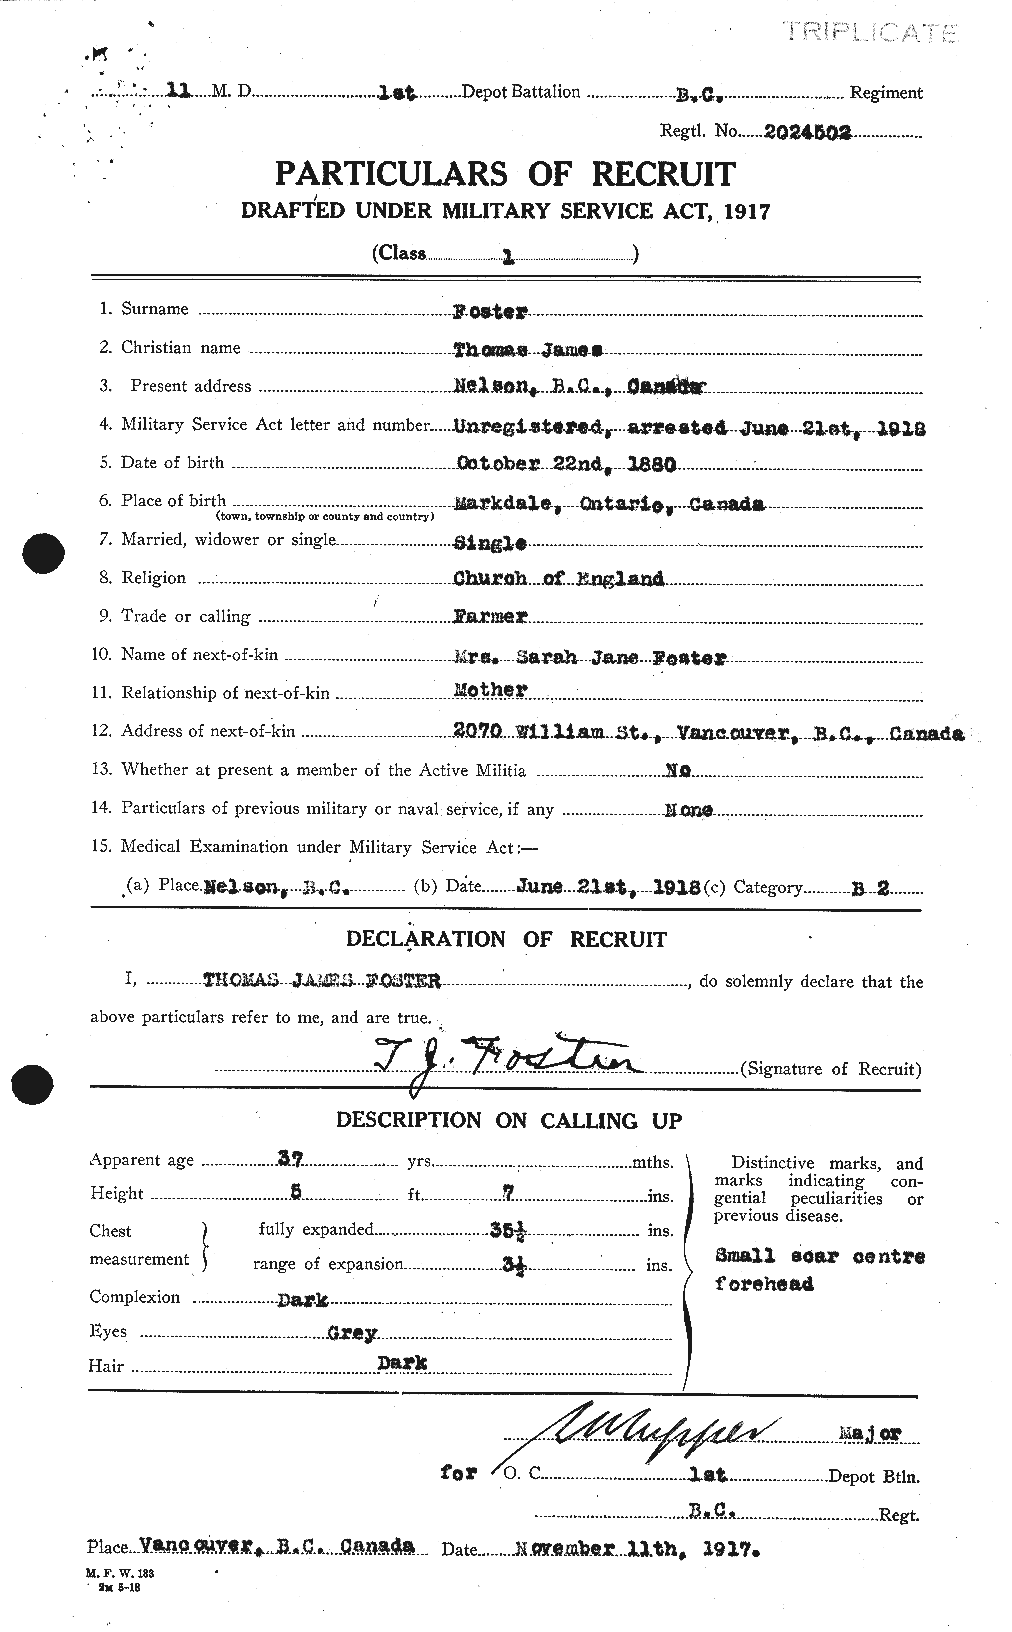 Personnel Records of the First World War - CEF 335239a